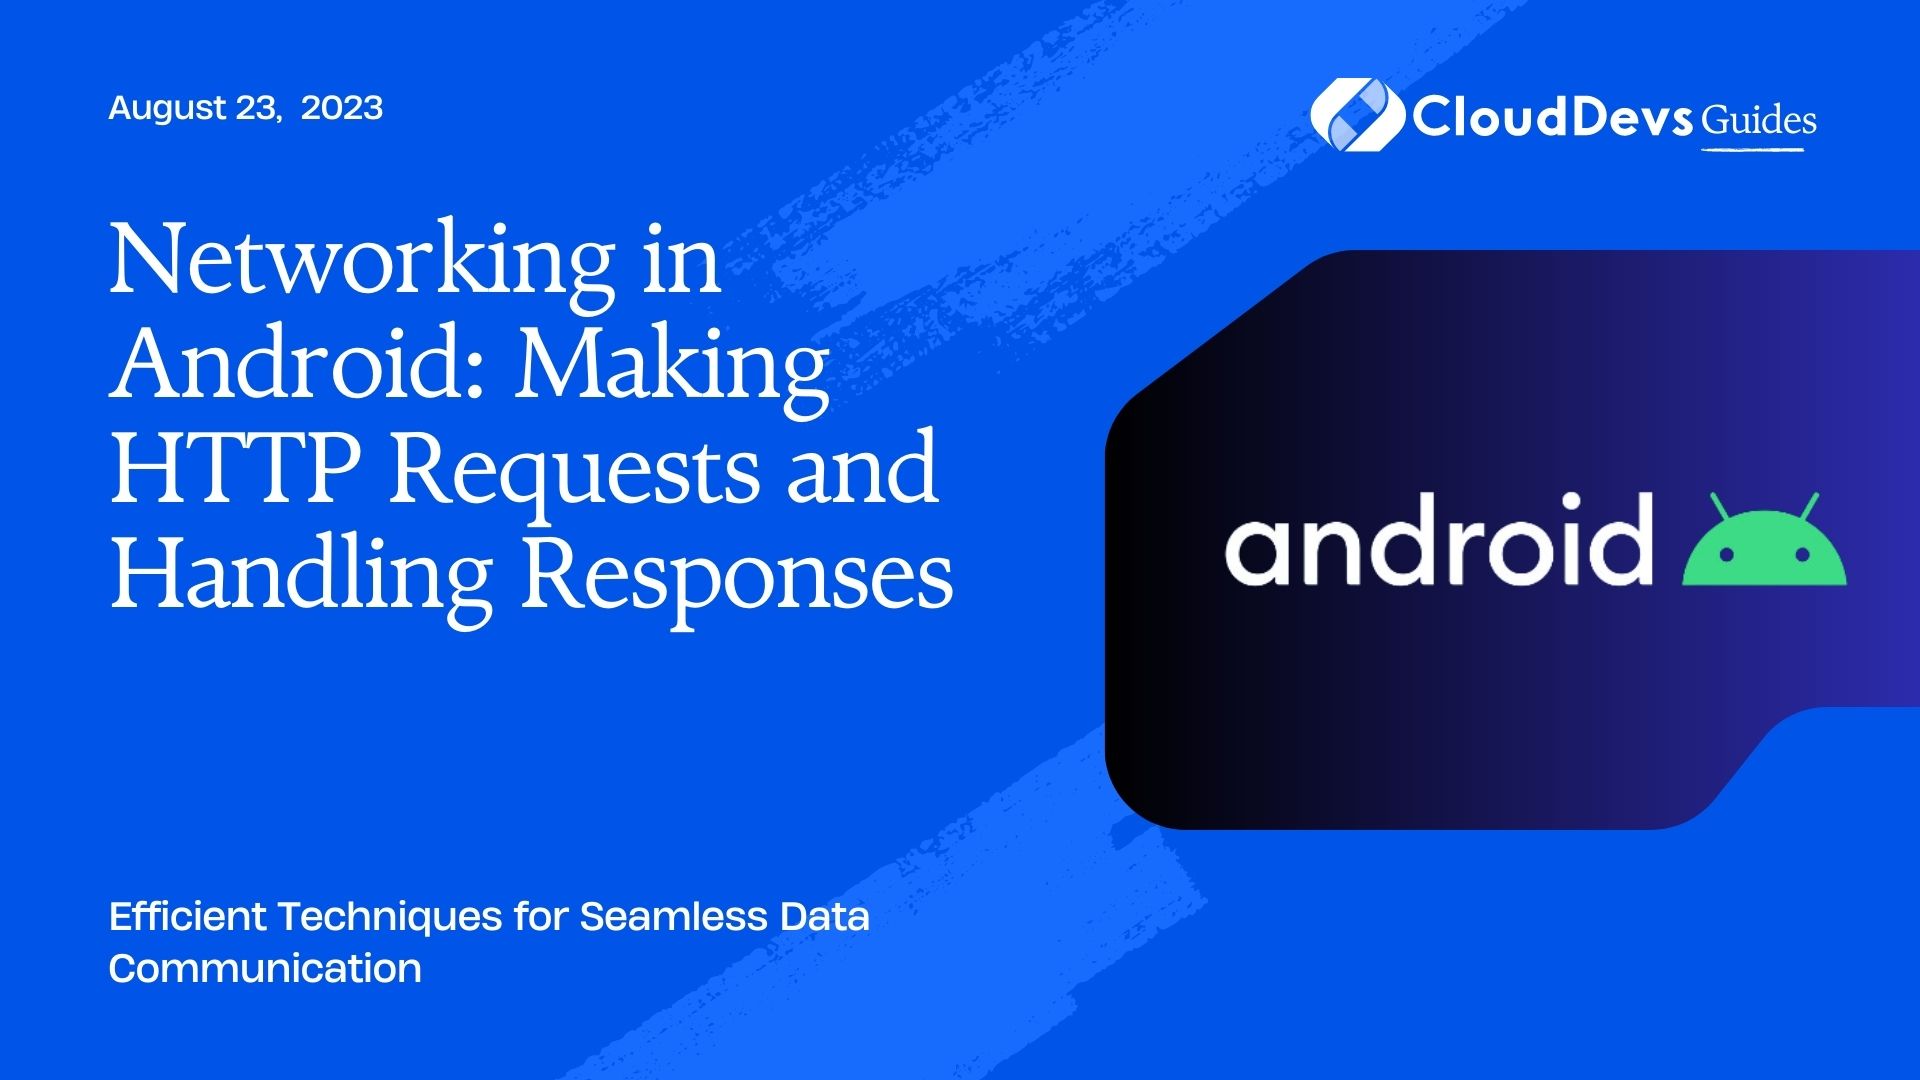 Networking in Android: Making HTTP Requests and Handling Responses